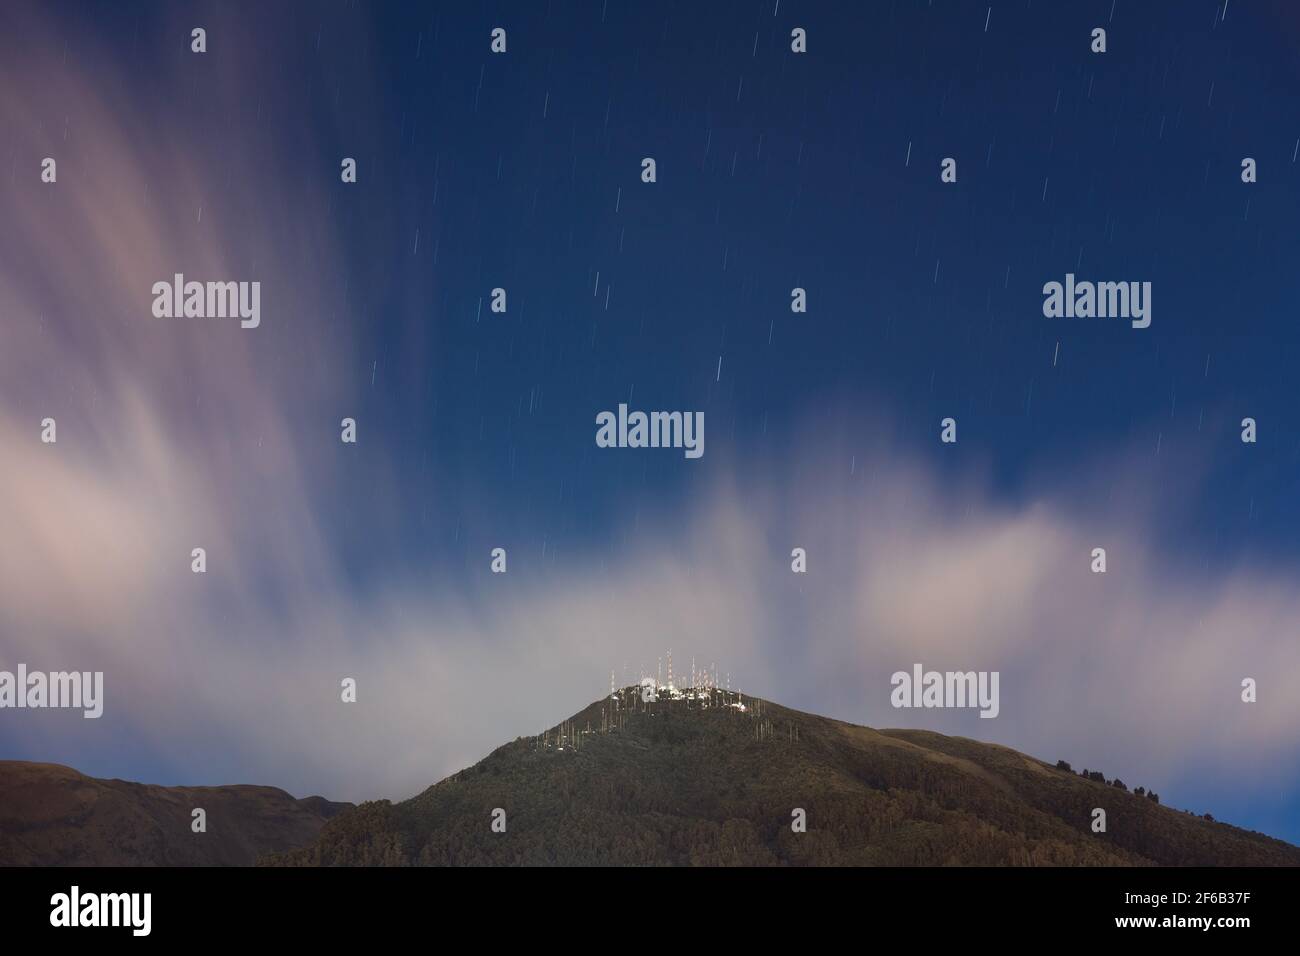 Long exposure of the Pichincha volcano with star trails at night, Quito, Ecuador. Stock Photo